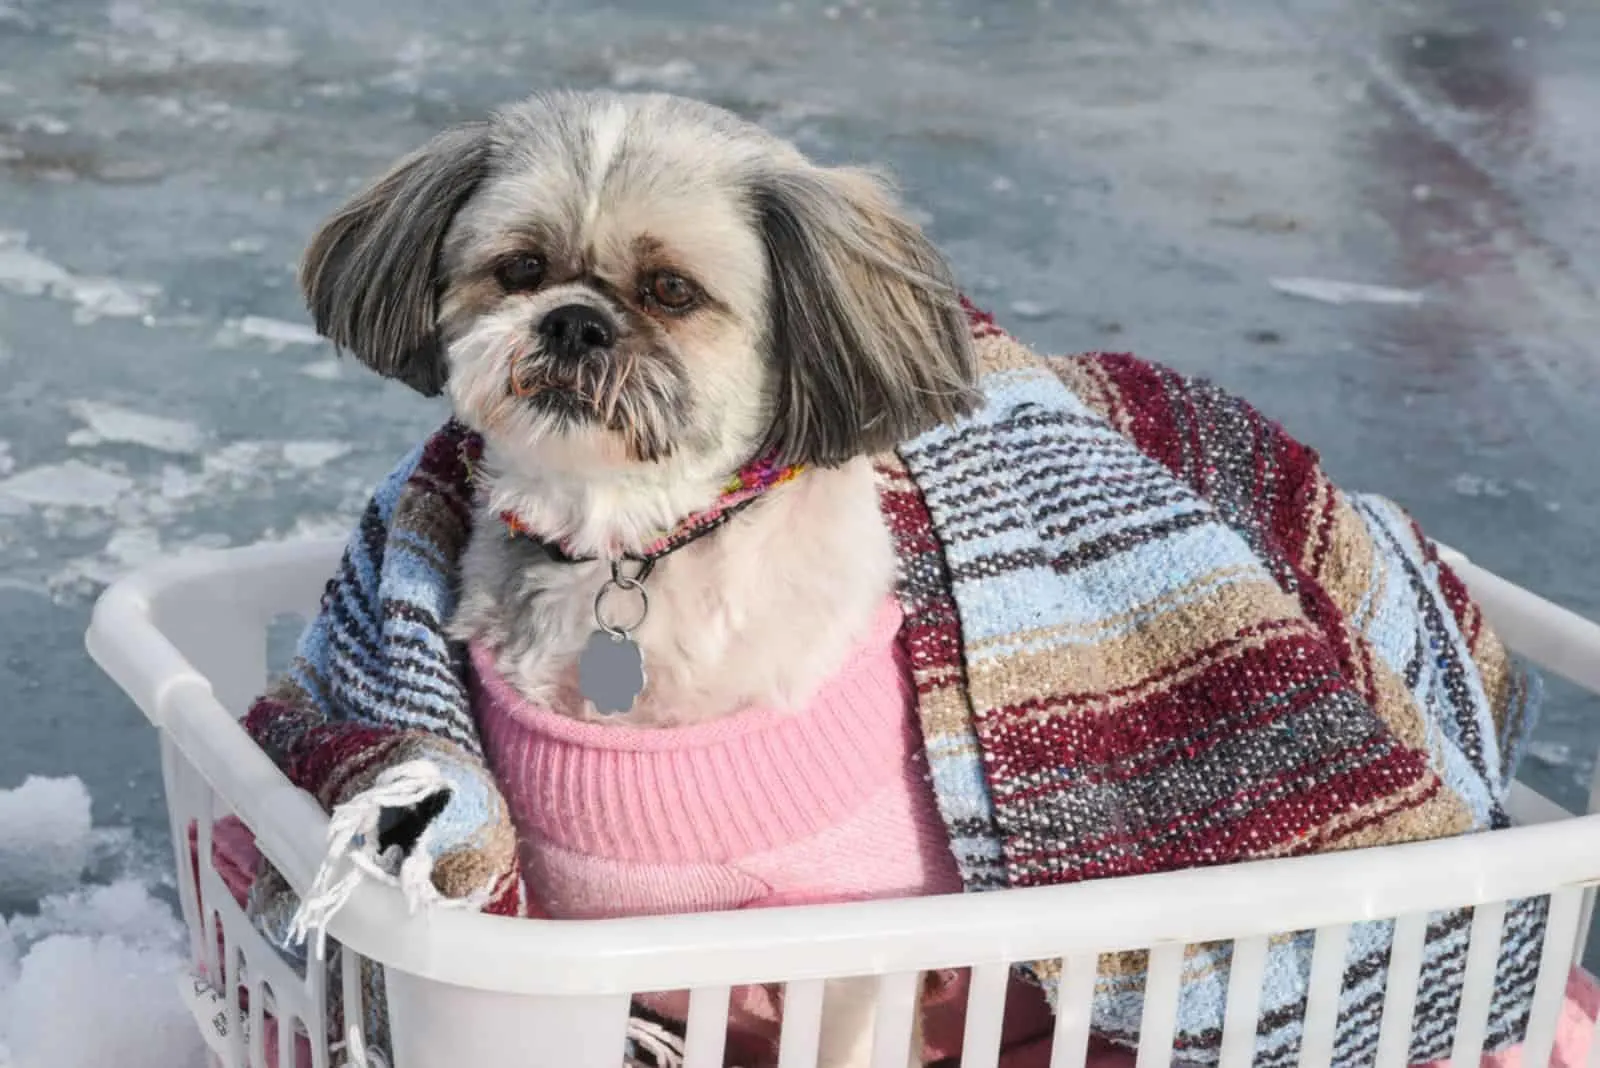 Overweight shih tzu keeping warm in a clothes basket